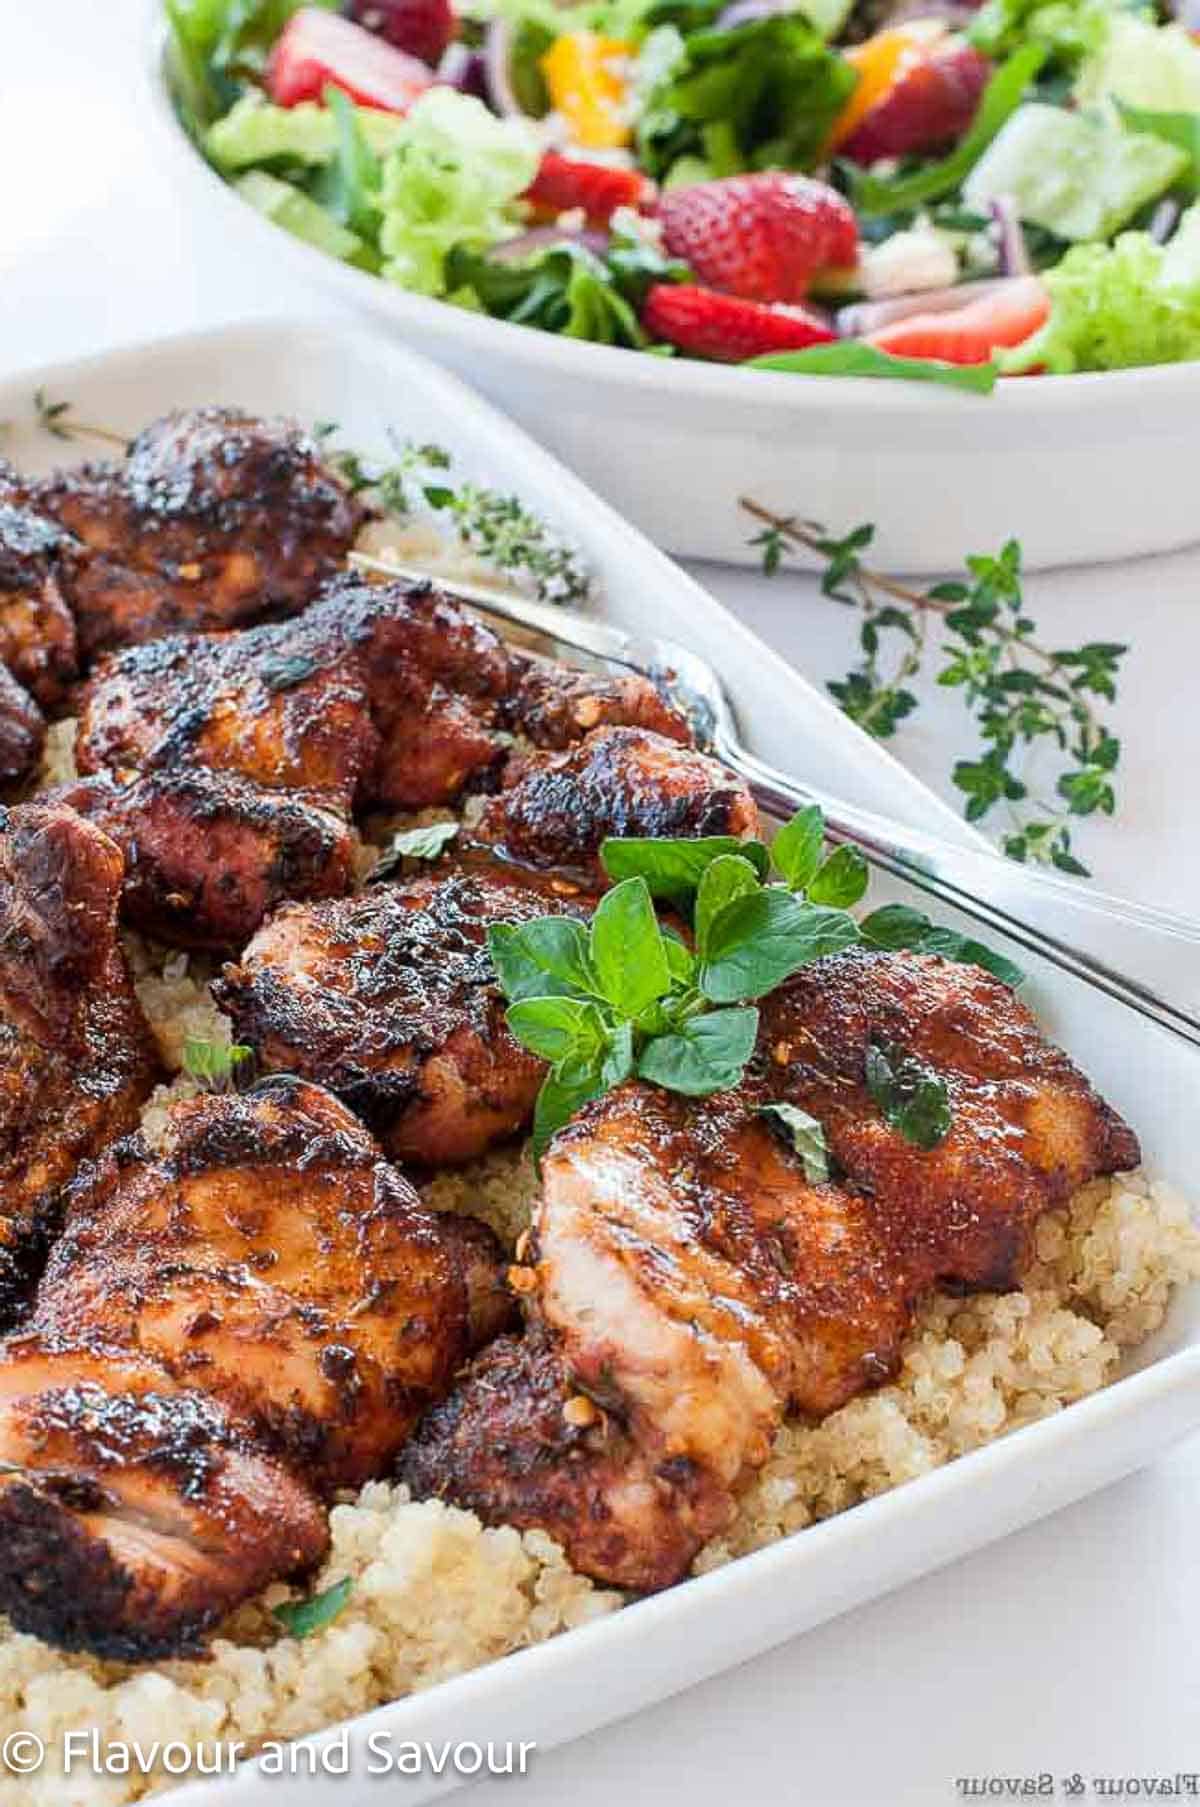 Grilled cajun chicken thighs with quinoa, garnished with fresh oregano with a colorful salad in the background.